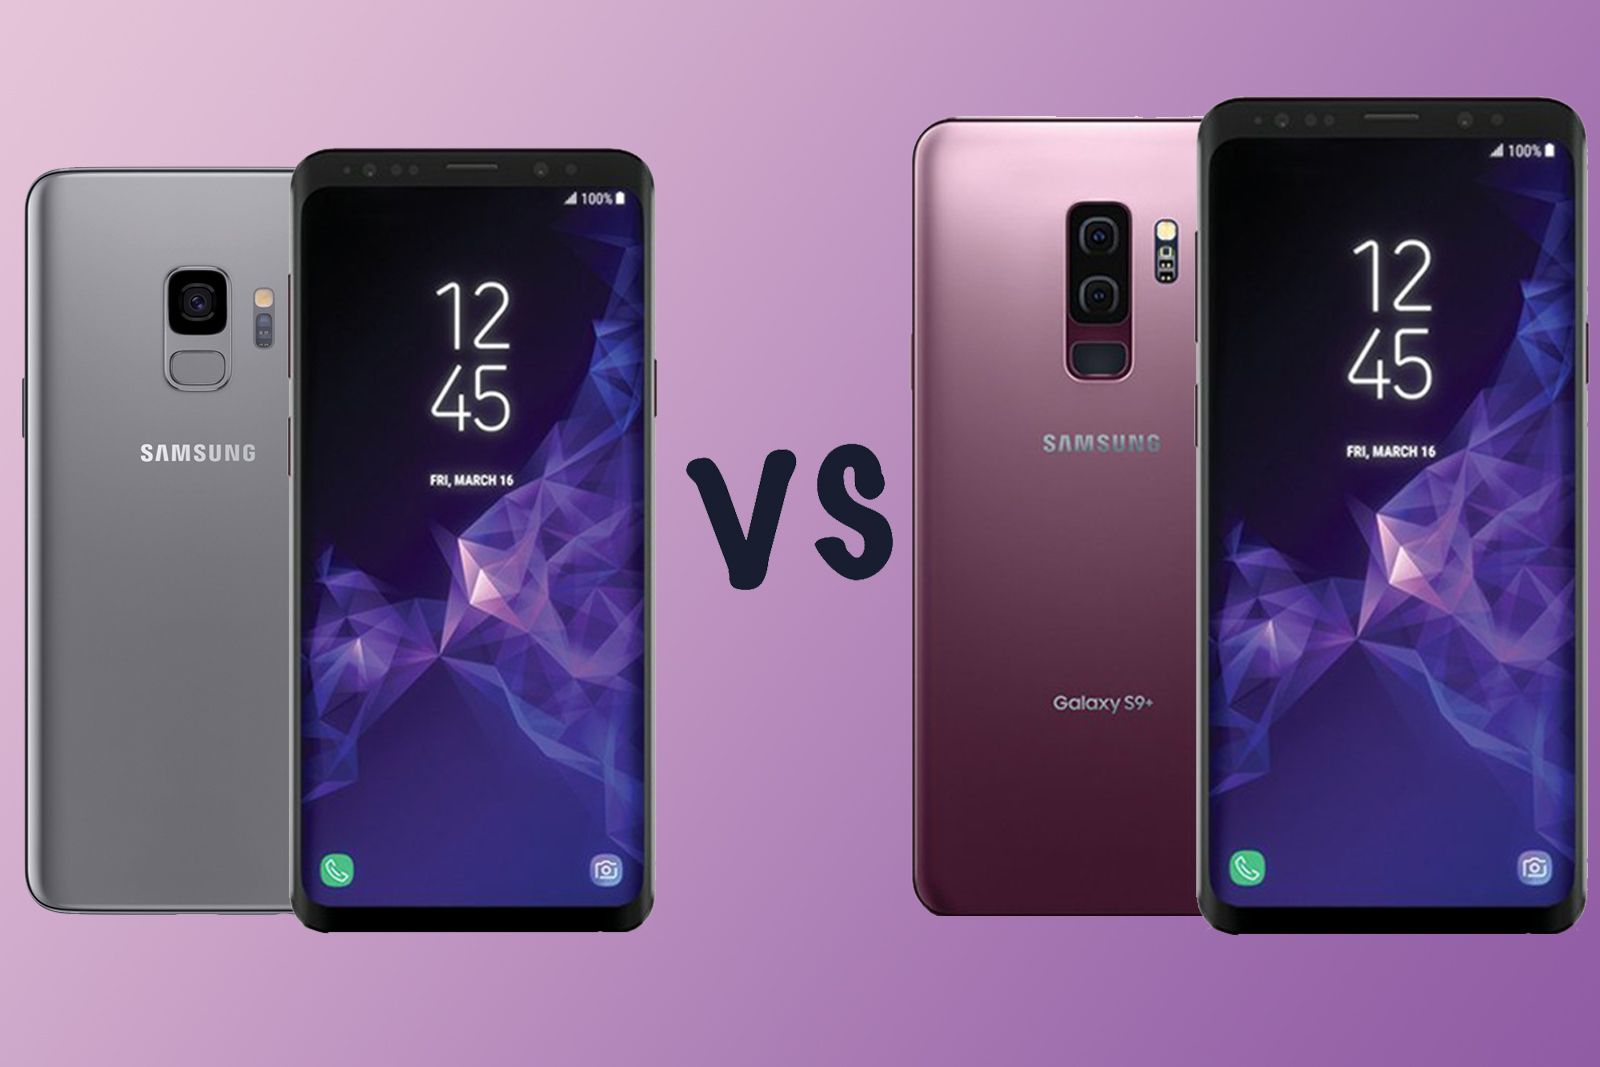 Samsung Galaxy S9 vs Galaxy S9 Whats the difference image 1